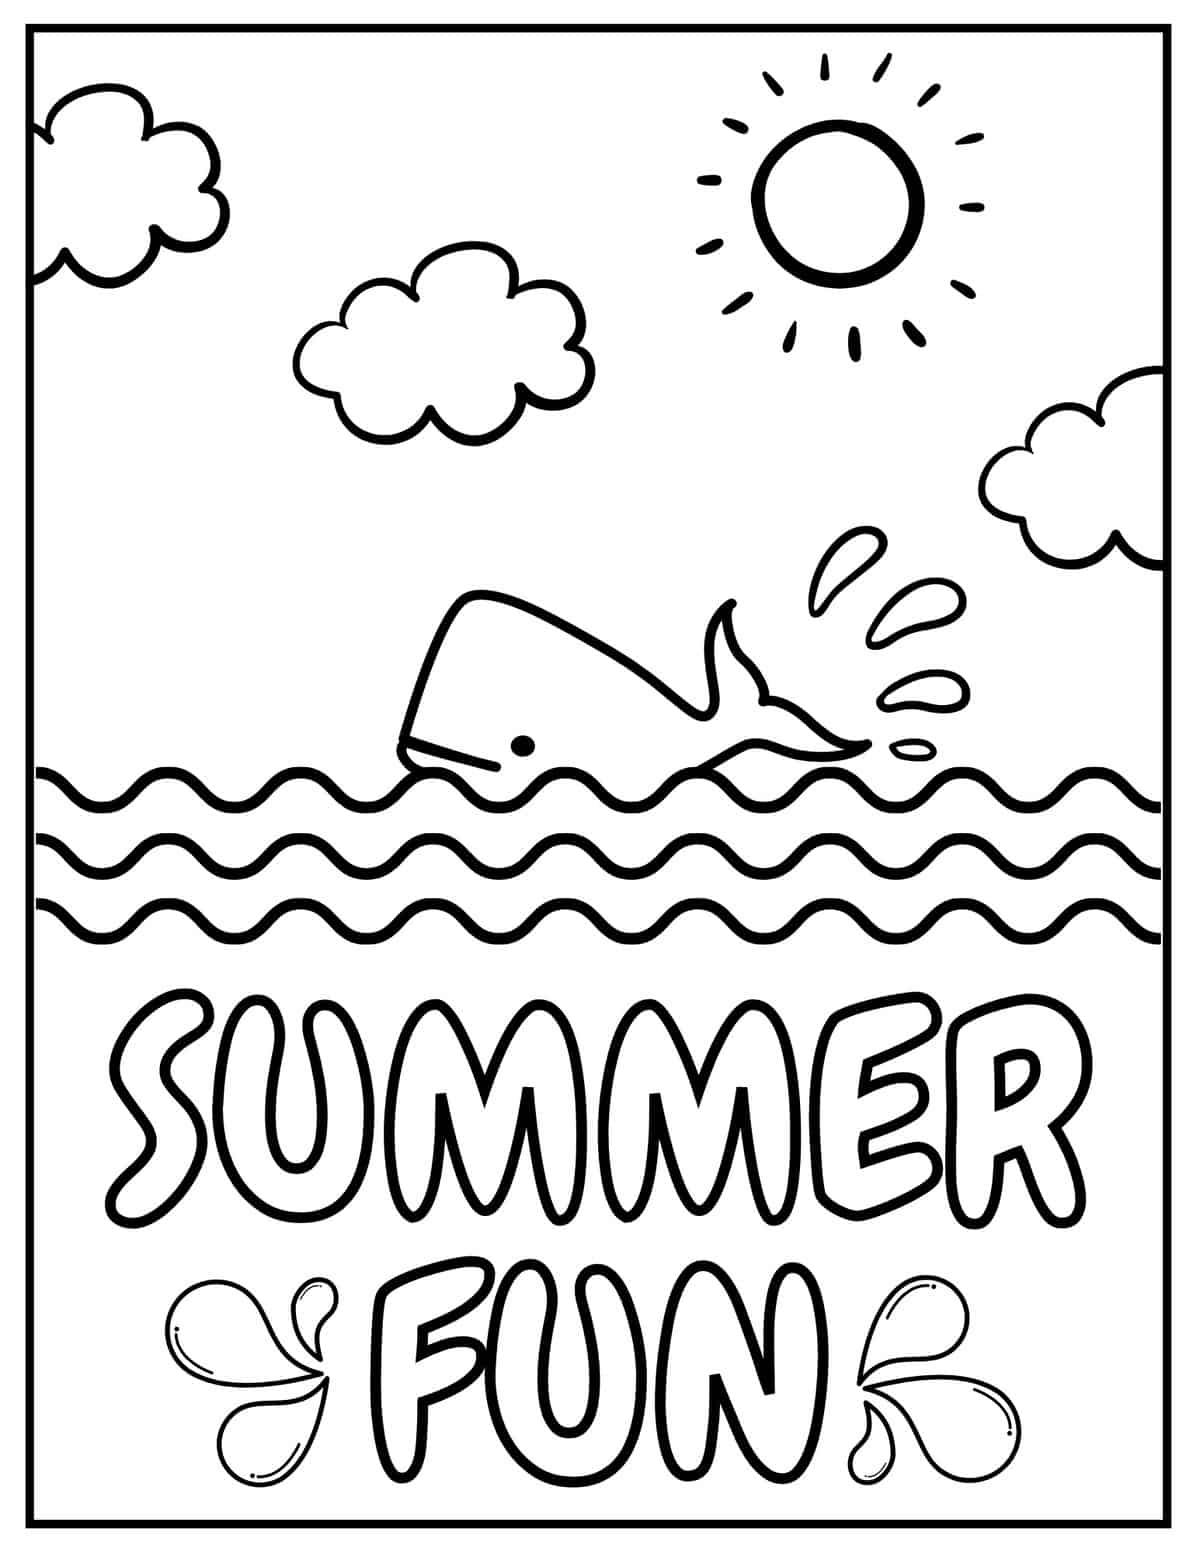 15 free summer coloring pages for kids prudent penny pincher